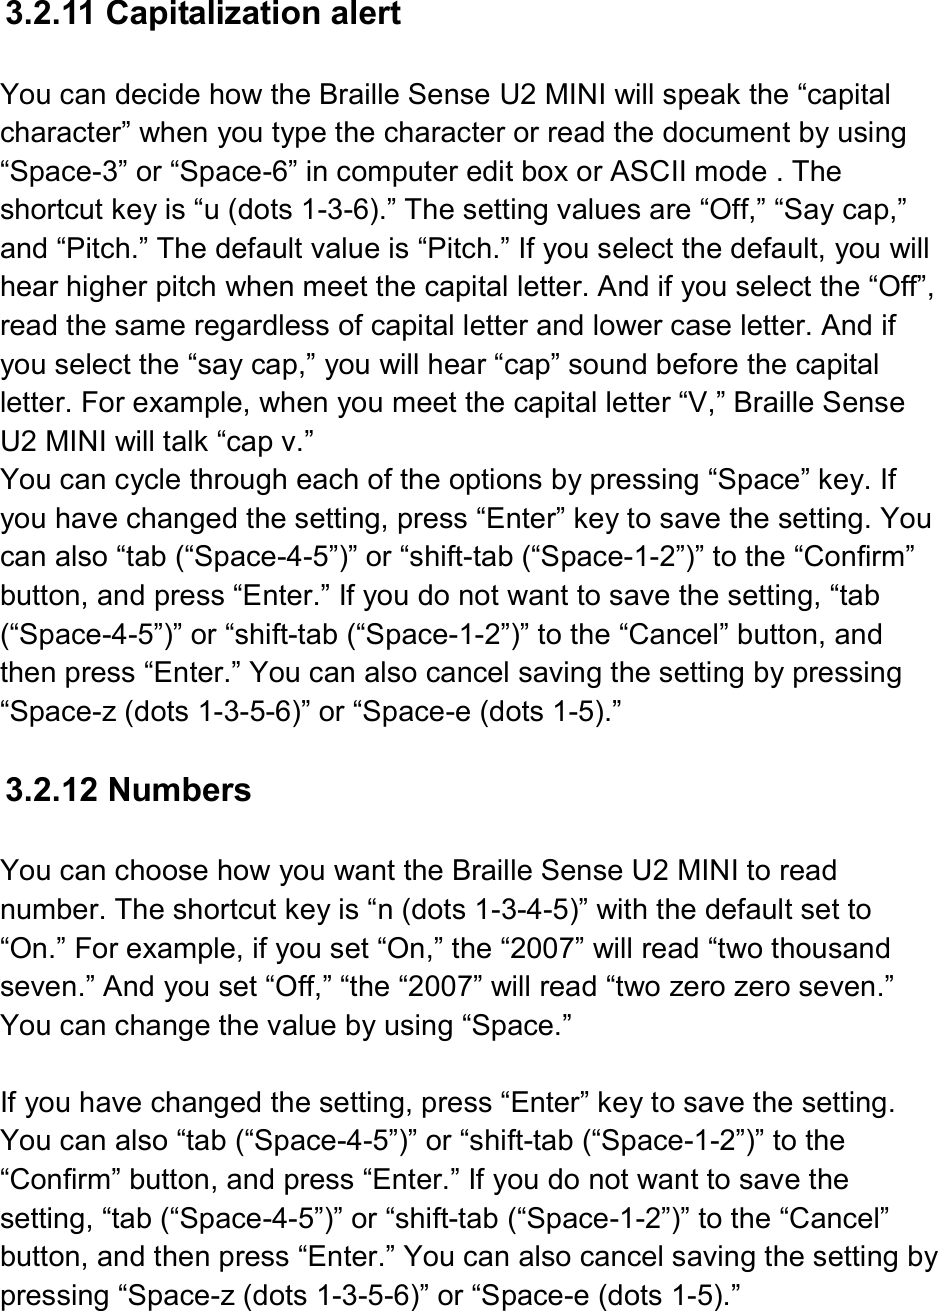  3.2.11 Capitalization alert  You can decide how the Braille Sense U2 MINI will speak the “capital character” when you type the character or read the document by using “Space-3” or “Space-6” in computer edit box or ASCII mode . The shortcut key is “u (dots 1-3-6).” The setting values are “Off,” “Say cap,” and “Pitch.” The default value is “Pitch.” If you select the default, you will hear higher pitch when meet the capital letter. And if you select the “Off”, read the same regardless of capital letter and lower case letter. And if you select the “say cap,” you will hear “cap” sound before the capital letter. For example, when you meet the capital letter “V,” Braille Sense U2 MINI will talk “cap v.” You can cycle through each of the options by pressing “Space” key. If you have changed the setting, press “Enter” key to save the setting. You can also “tab (“Space-4-5”)” or “shift-tab (“Space-1-2”)” to the “Confirm” button, and press “Enter.” If you do not want to save the setting, “tab (“Space-4-5”)” or “shift-tab (“Space-1-2”)” to the “Cancel” button, and then press “Enter.” You can also cancel saving the setting by pressing “Space-z (dots 1-3-5-6)” or “Space-e (dots 1-5).”  3.2.12 Numbers  You can choose how you want the Braille Sense U2 MINI to read number. The shortcut key is “n (dots 1-3-4-5)” with the default set to “On.” For example, if you set “On,” the “2007” will read “two thousand seven.” And you set “Off,” “the “2007” will read “two zero zero seven.” You can change the value by using “Space.”  If you have changed the setting, press “Enter” key to save the setting. You can also “tab (“Space-4-5”)” or “shift-tab (“Space-1-2”)” to the “Confirm” button, and press “Enter.” If you do not want to save the setting, “tab (“Space-4-5”)” or “shift-tab (“Space-1-2”)” to the “Cancel” button, and then press “Enter.” You can also cancel saving the setting by pressing “Space-z (dots 1-3-5-6)” or “Space-e (dots 1-5).”  